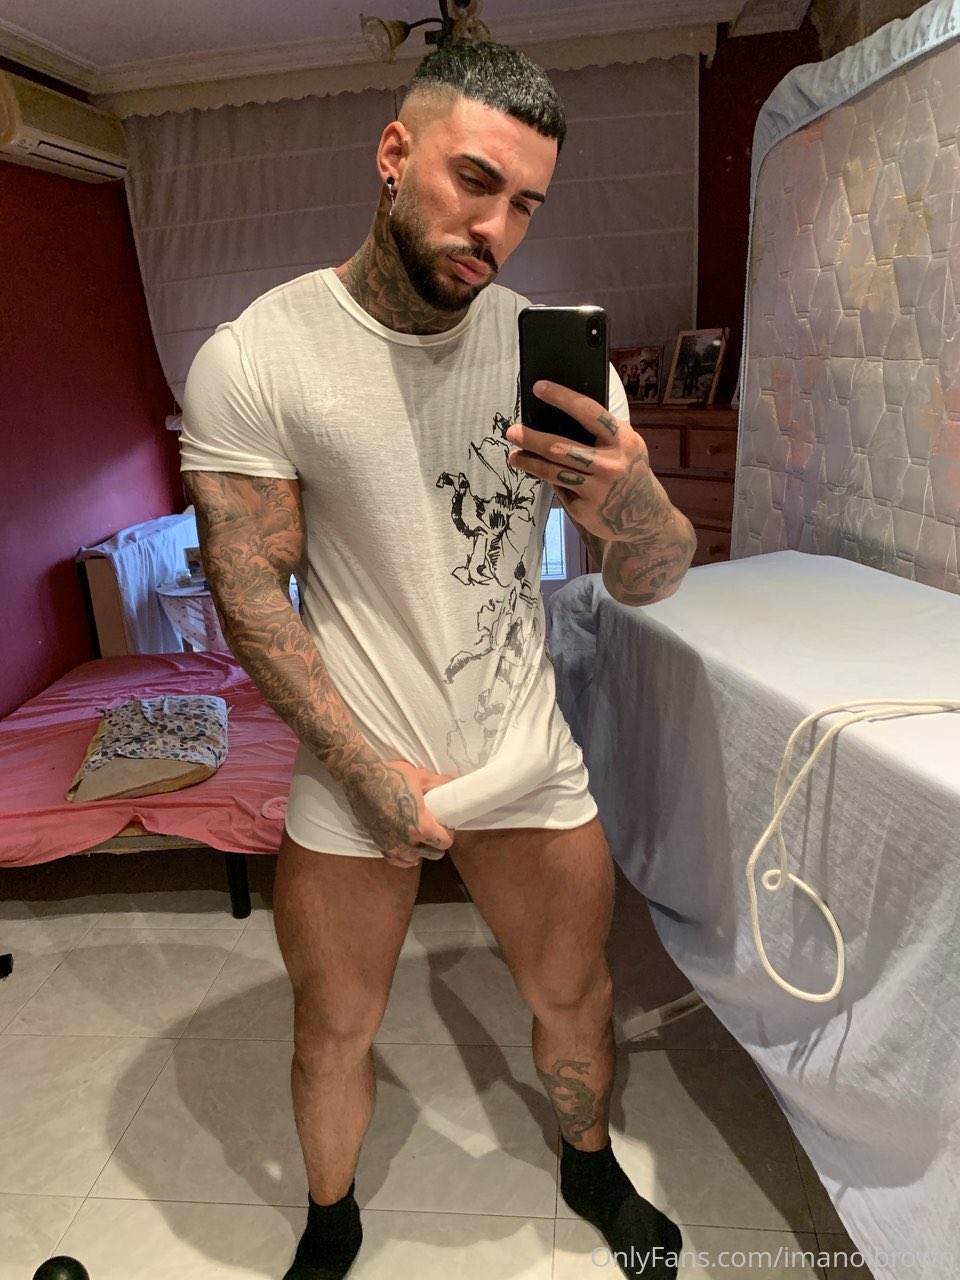 What Is Onlyfans Used For